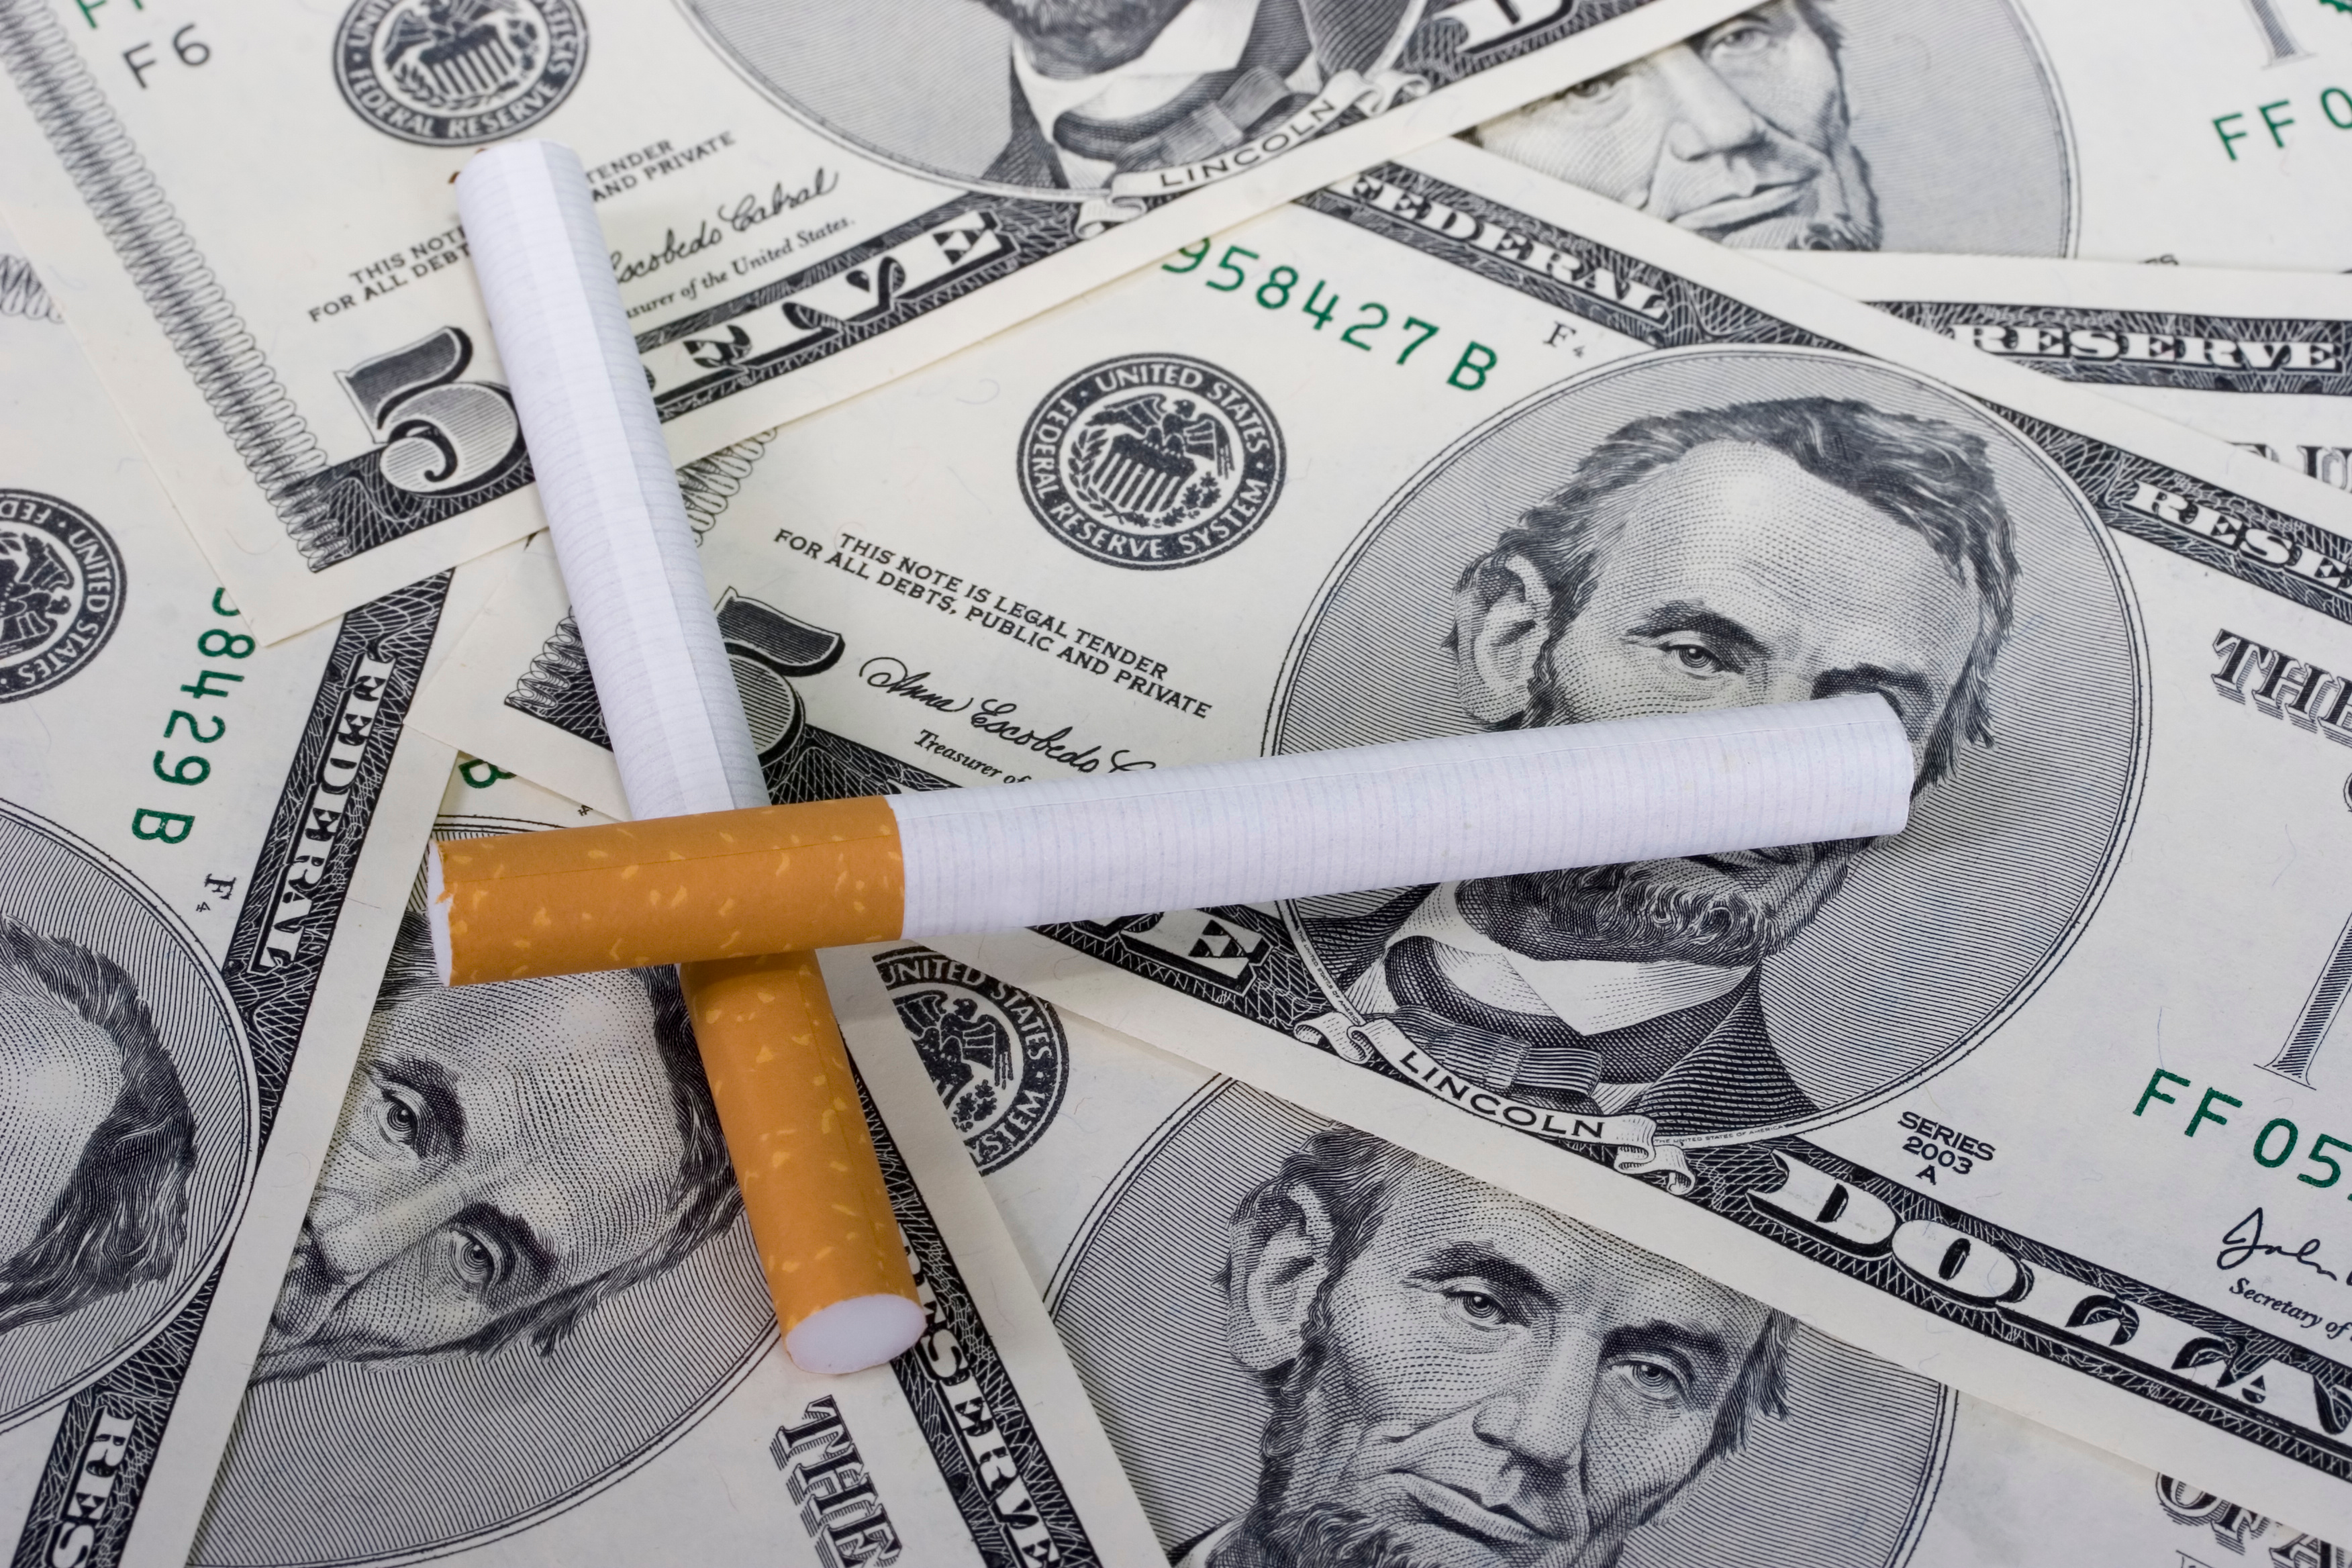 Stock image of cigarettes on top of cash. 